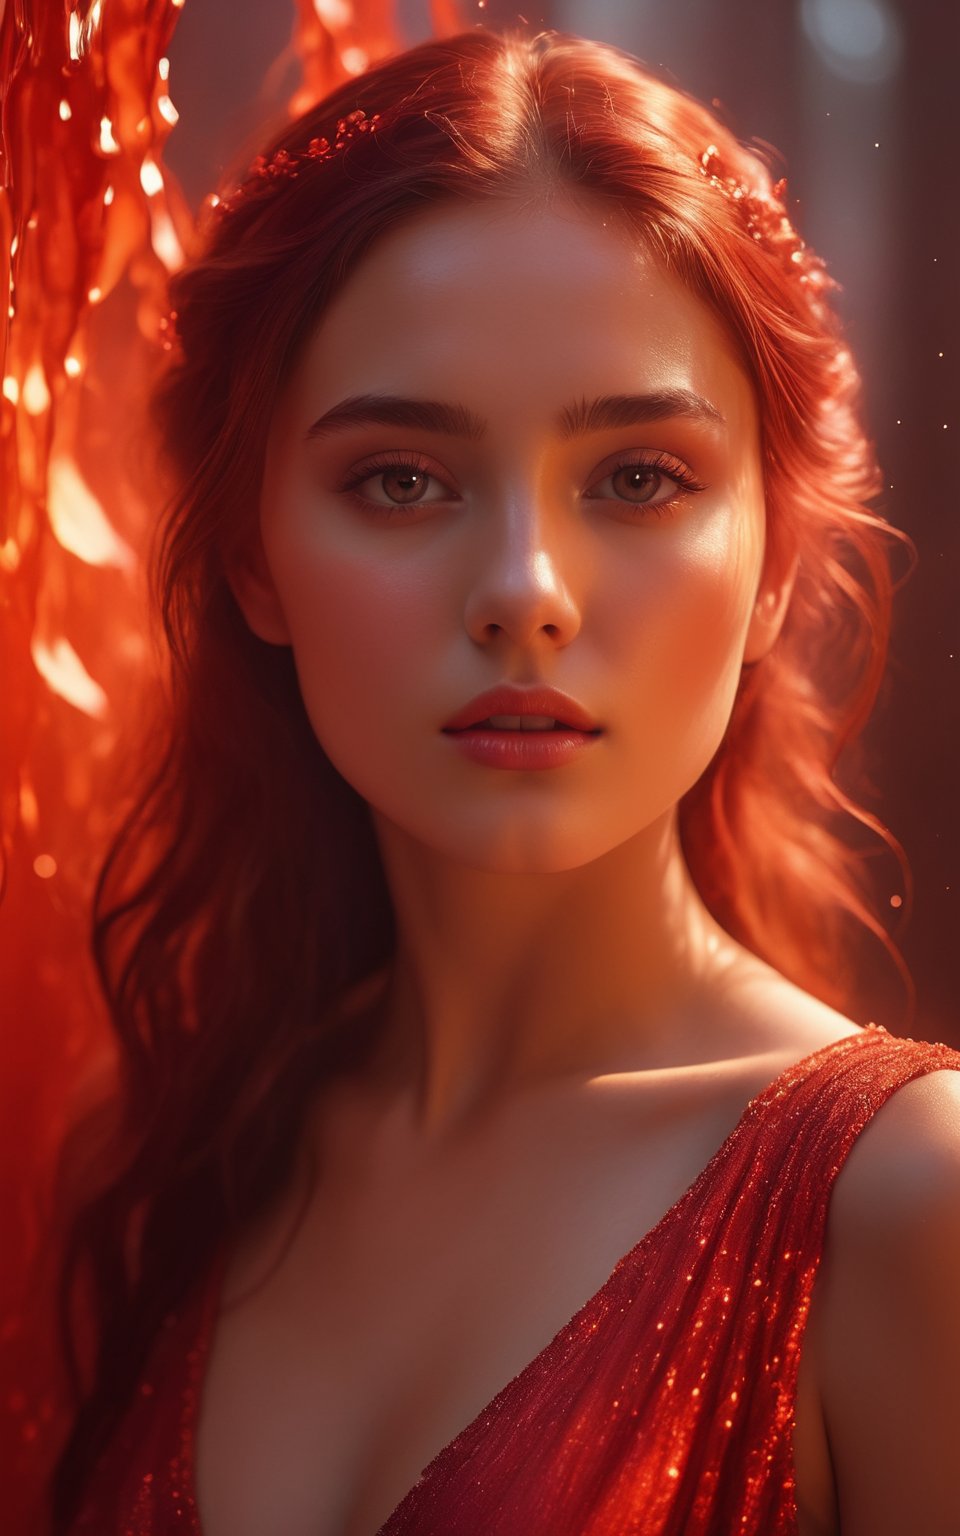 (best quality, 4K, 8K, high-resolution, masterpiece), ultra-detailed, photorealistic, young stunning woman, ethereal glow, red hues, soft lighting, melting effect, surreal atmosphere, digital art.